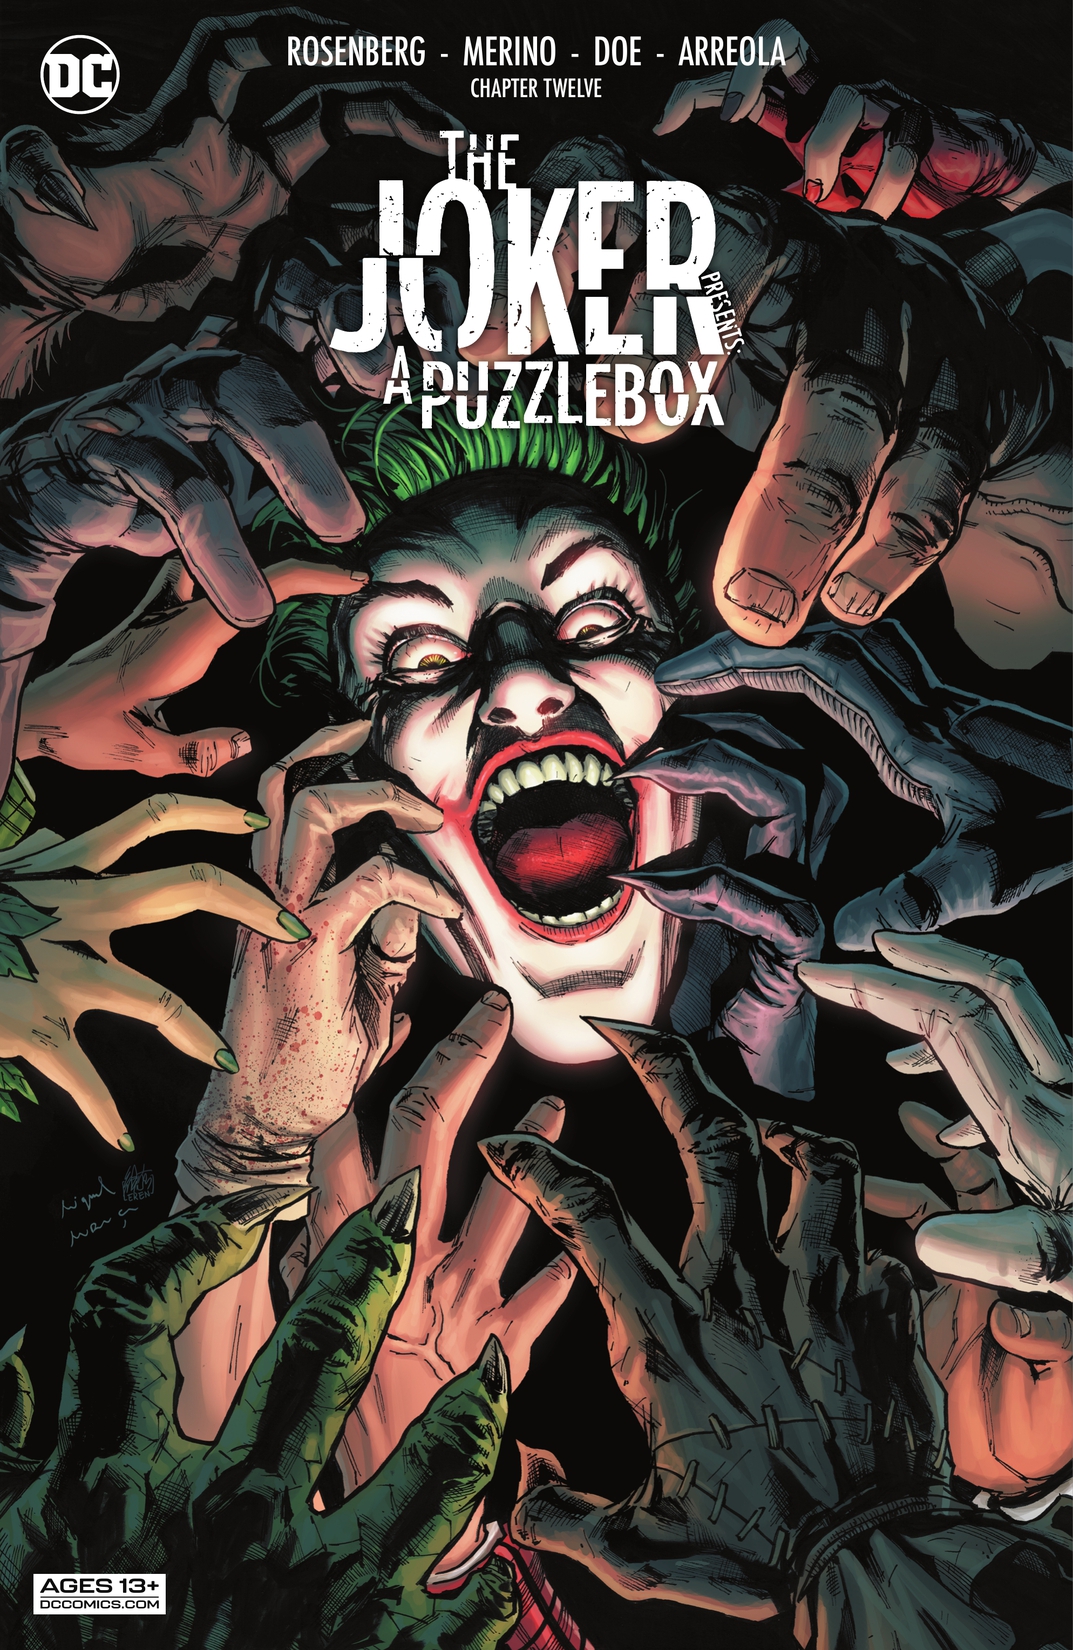 The Joker Presents: A Puzzlebox Director's Cut #12 preview images